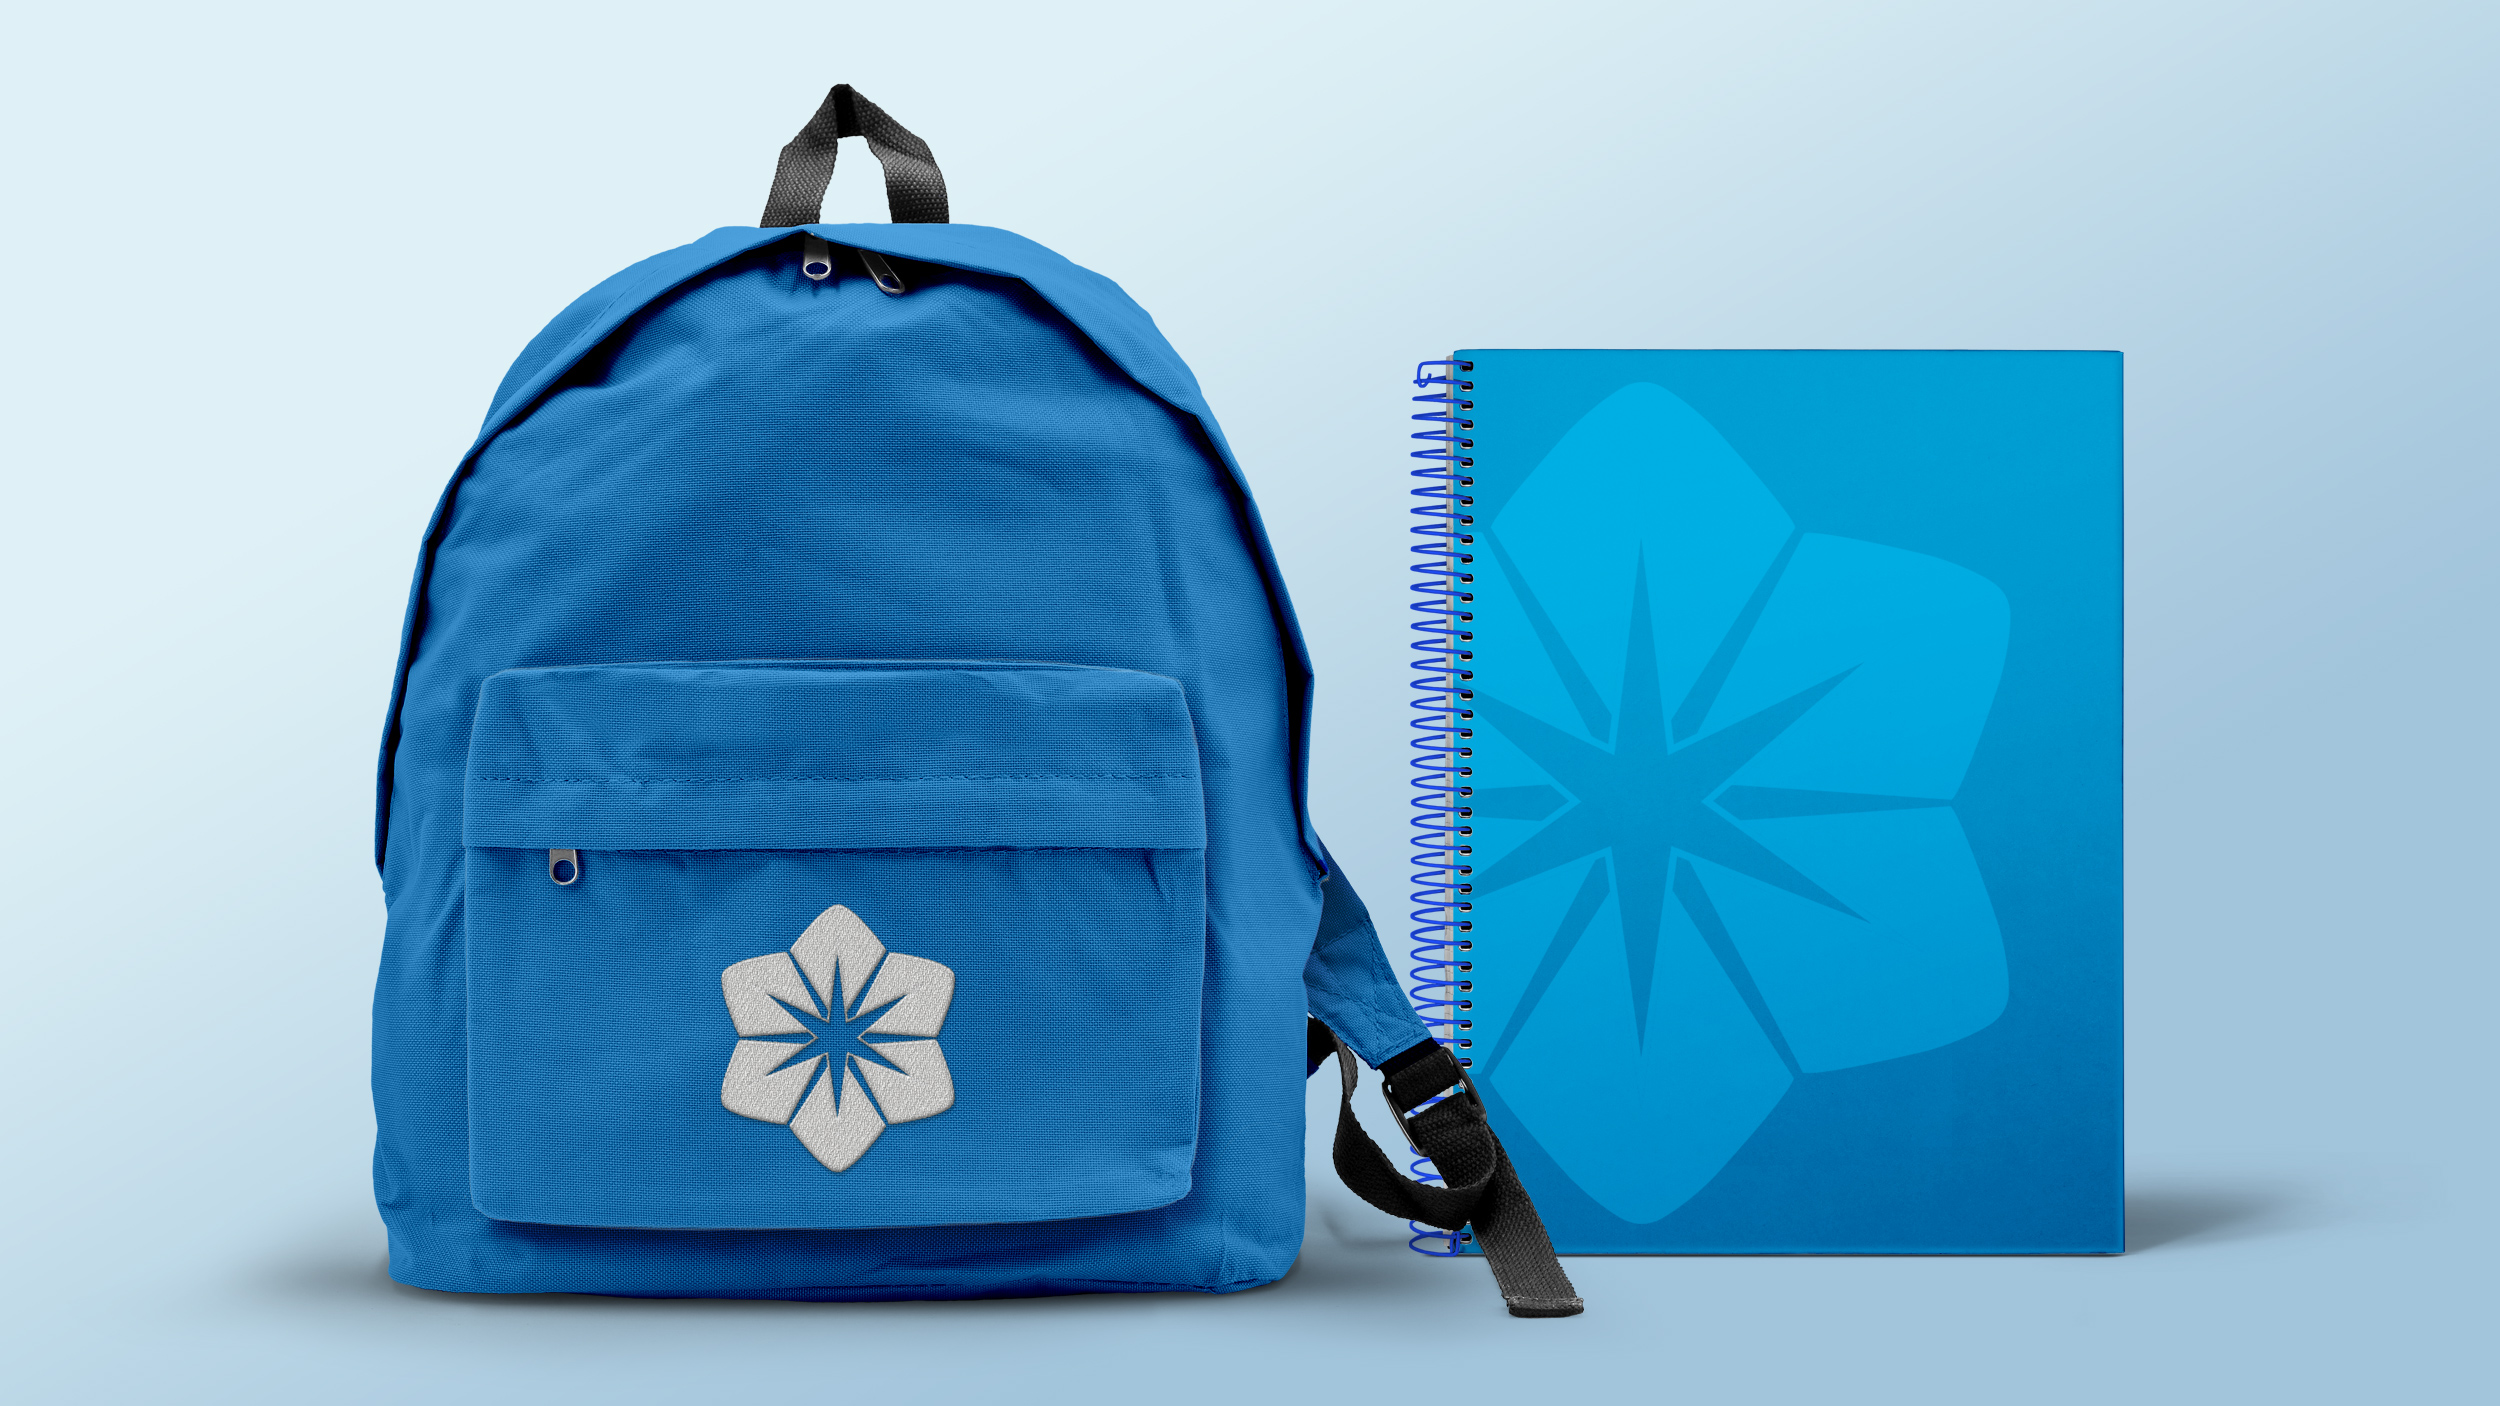 Branded school bag and notebook for St Mary's Gerrards Cross